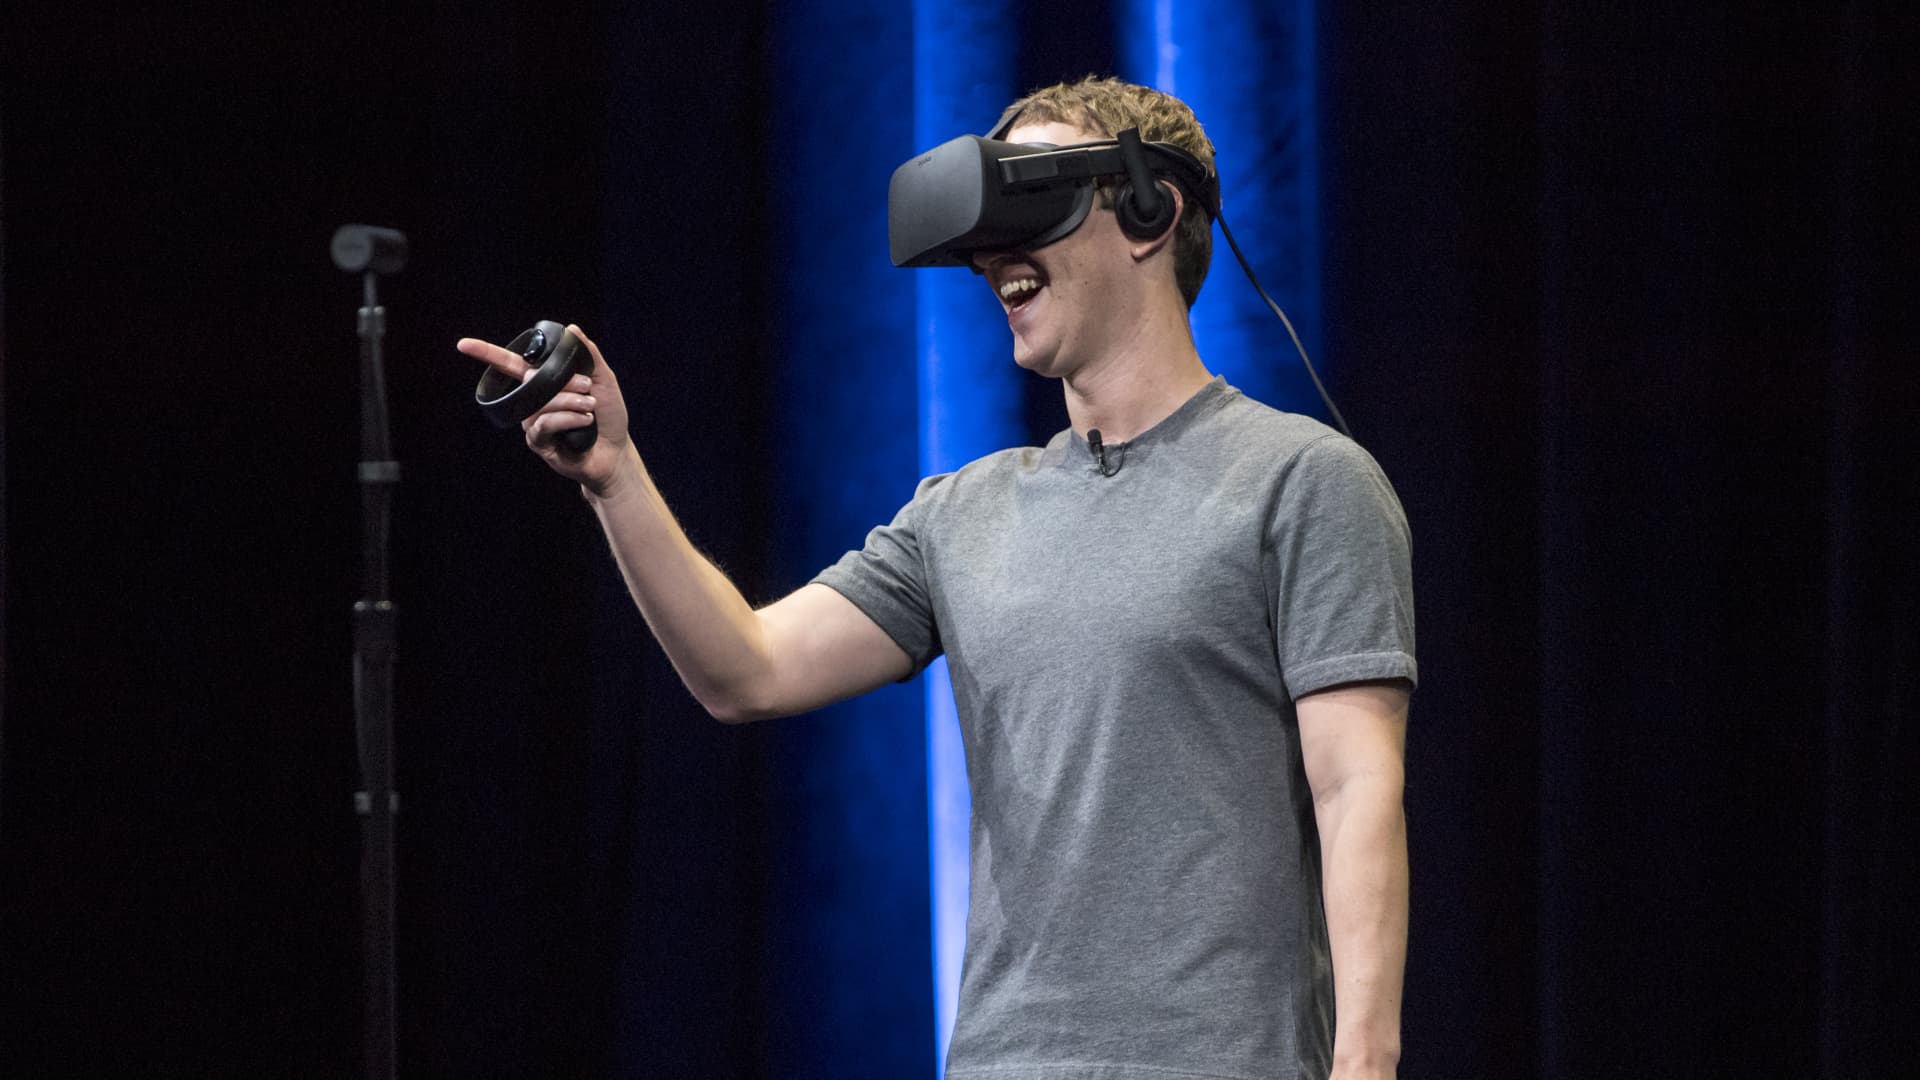 Meta CEO Mark Zuckerberg demonstrates an Oculus Rift virtual reality (VR) headset and Oculus Touch controllers during the Oculus Connect 3 event in San Jose, California, U.S., on Thursday, Oct. 6, 2016.